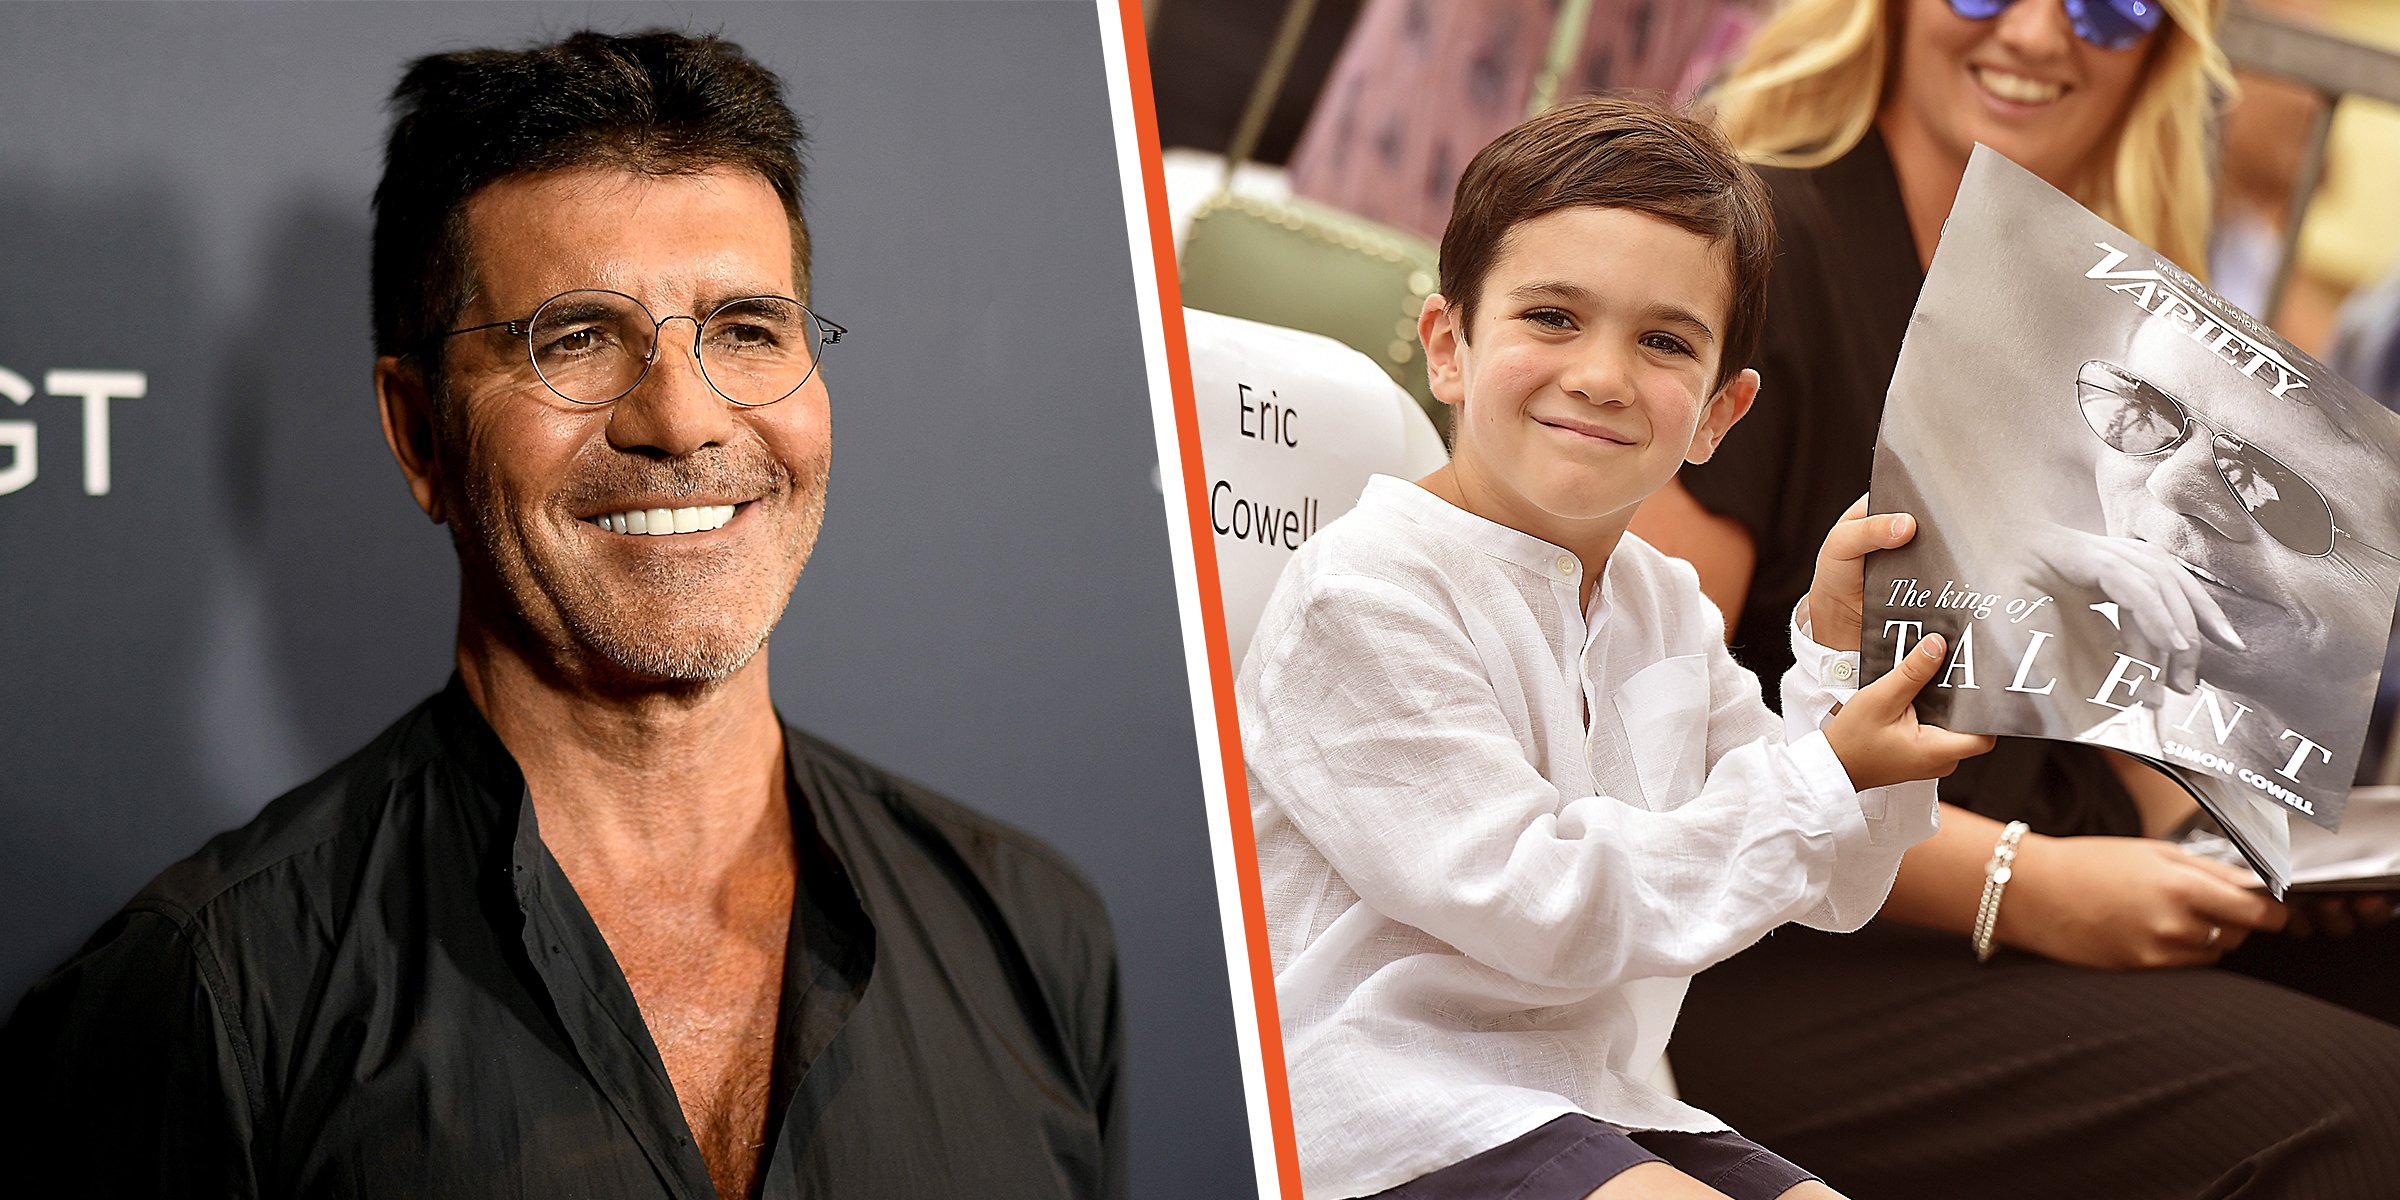 Simon Cowell | Eric Cowell | Source: Getty Images 